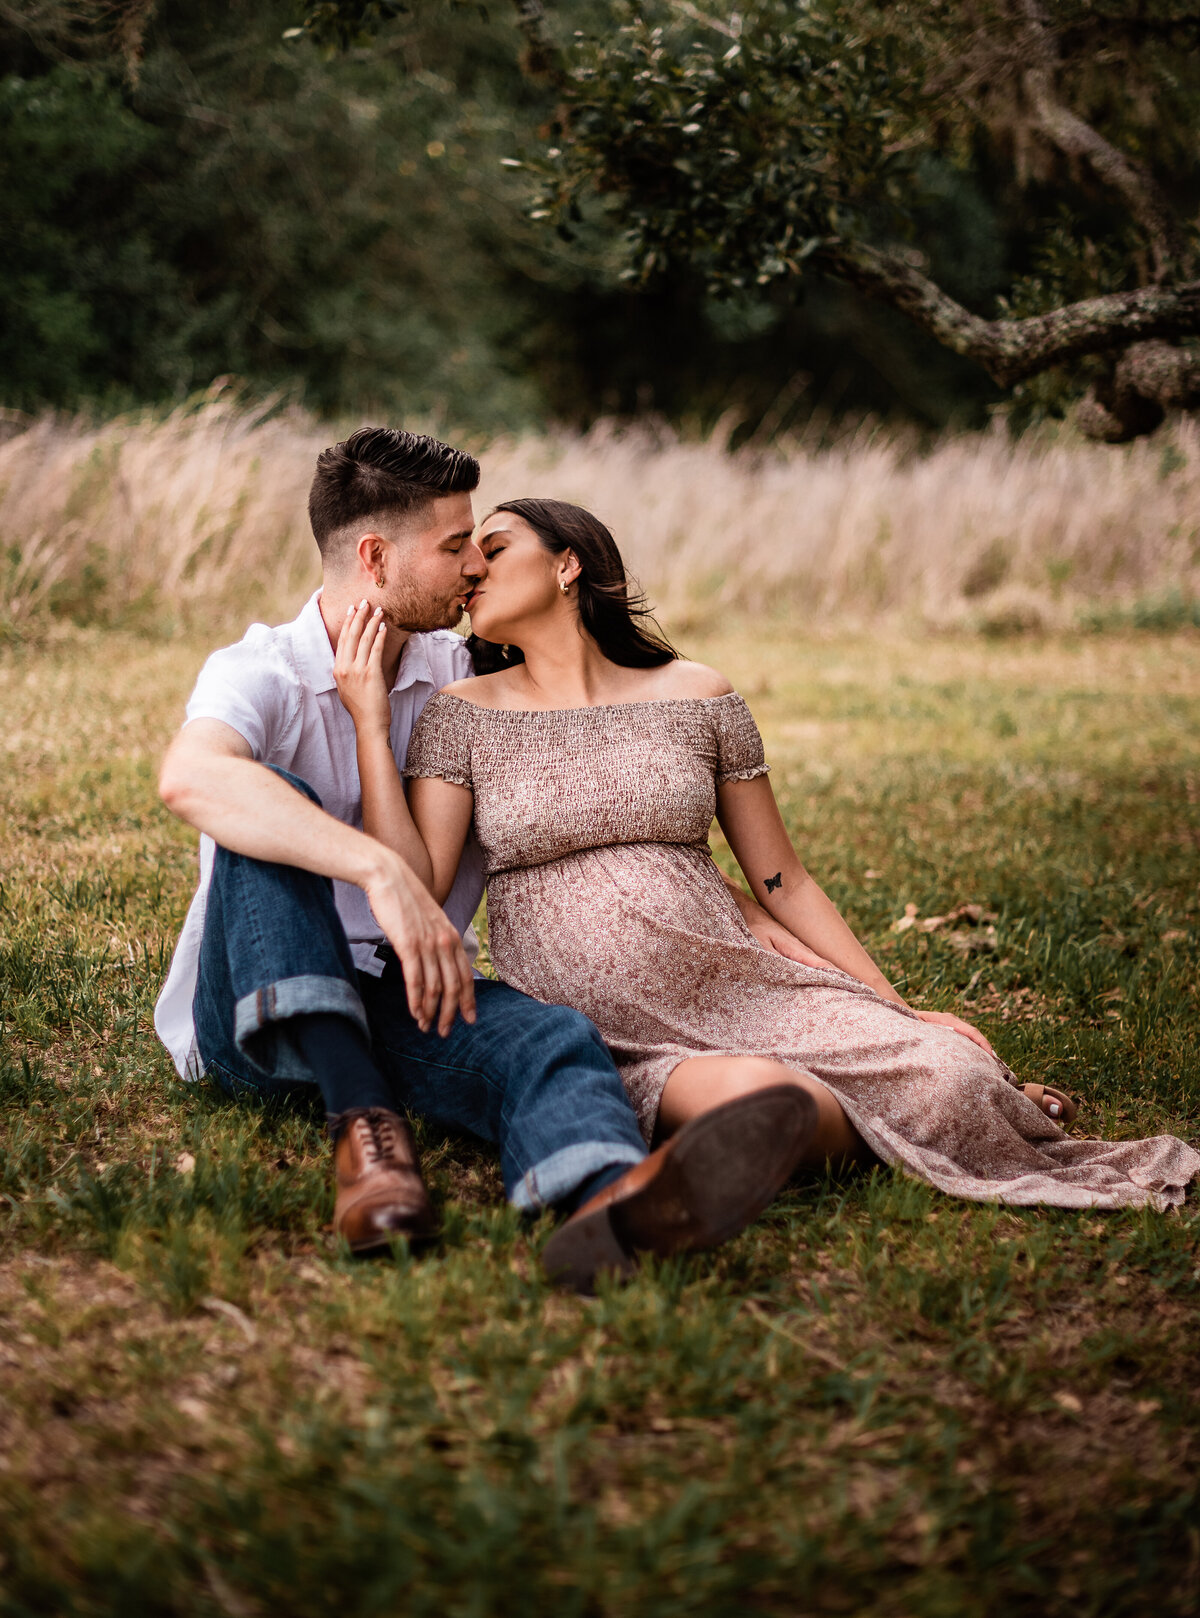 A couple sits near a field of long grass and cuddles close while they kiss.